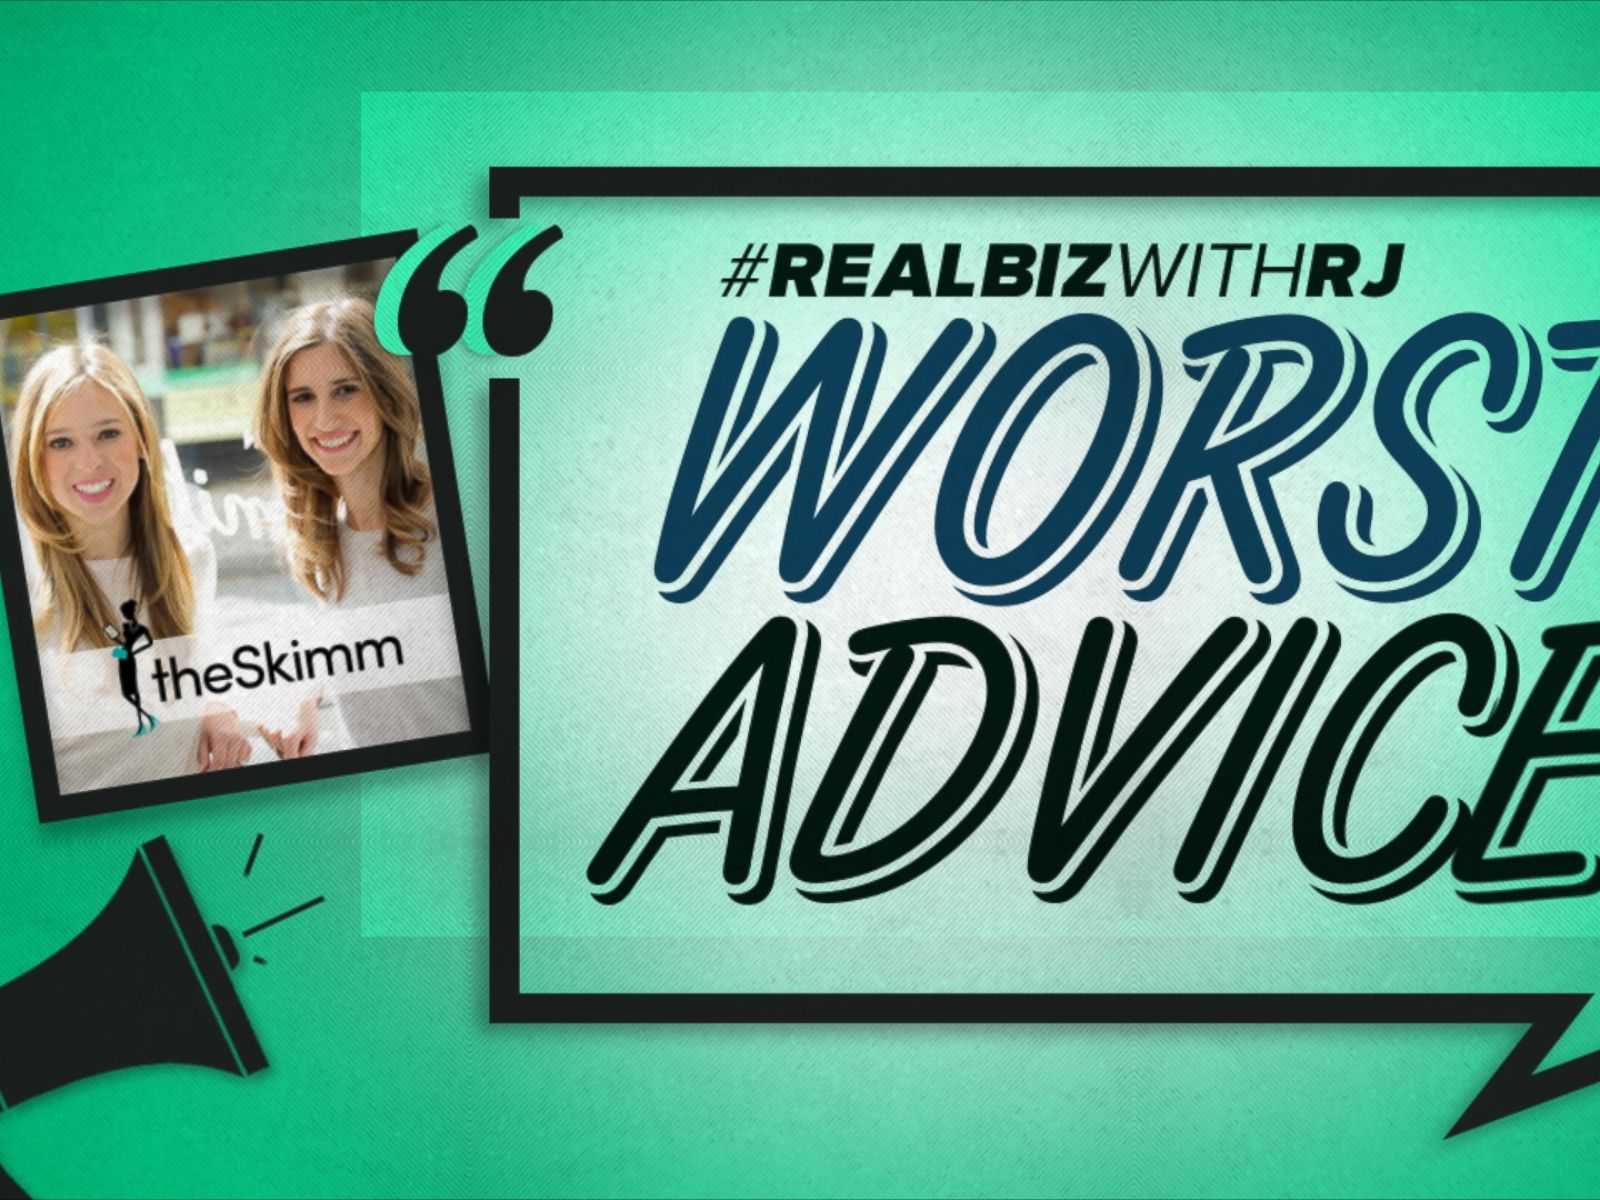 Worst Advice: theSkimm Co-Founders